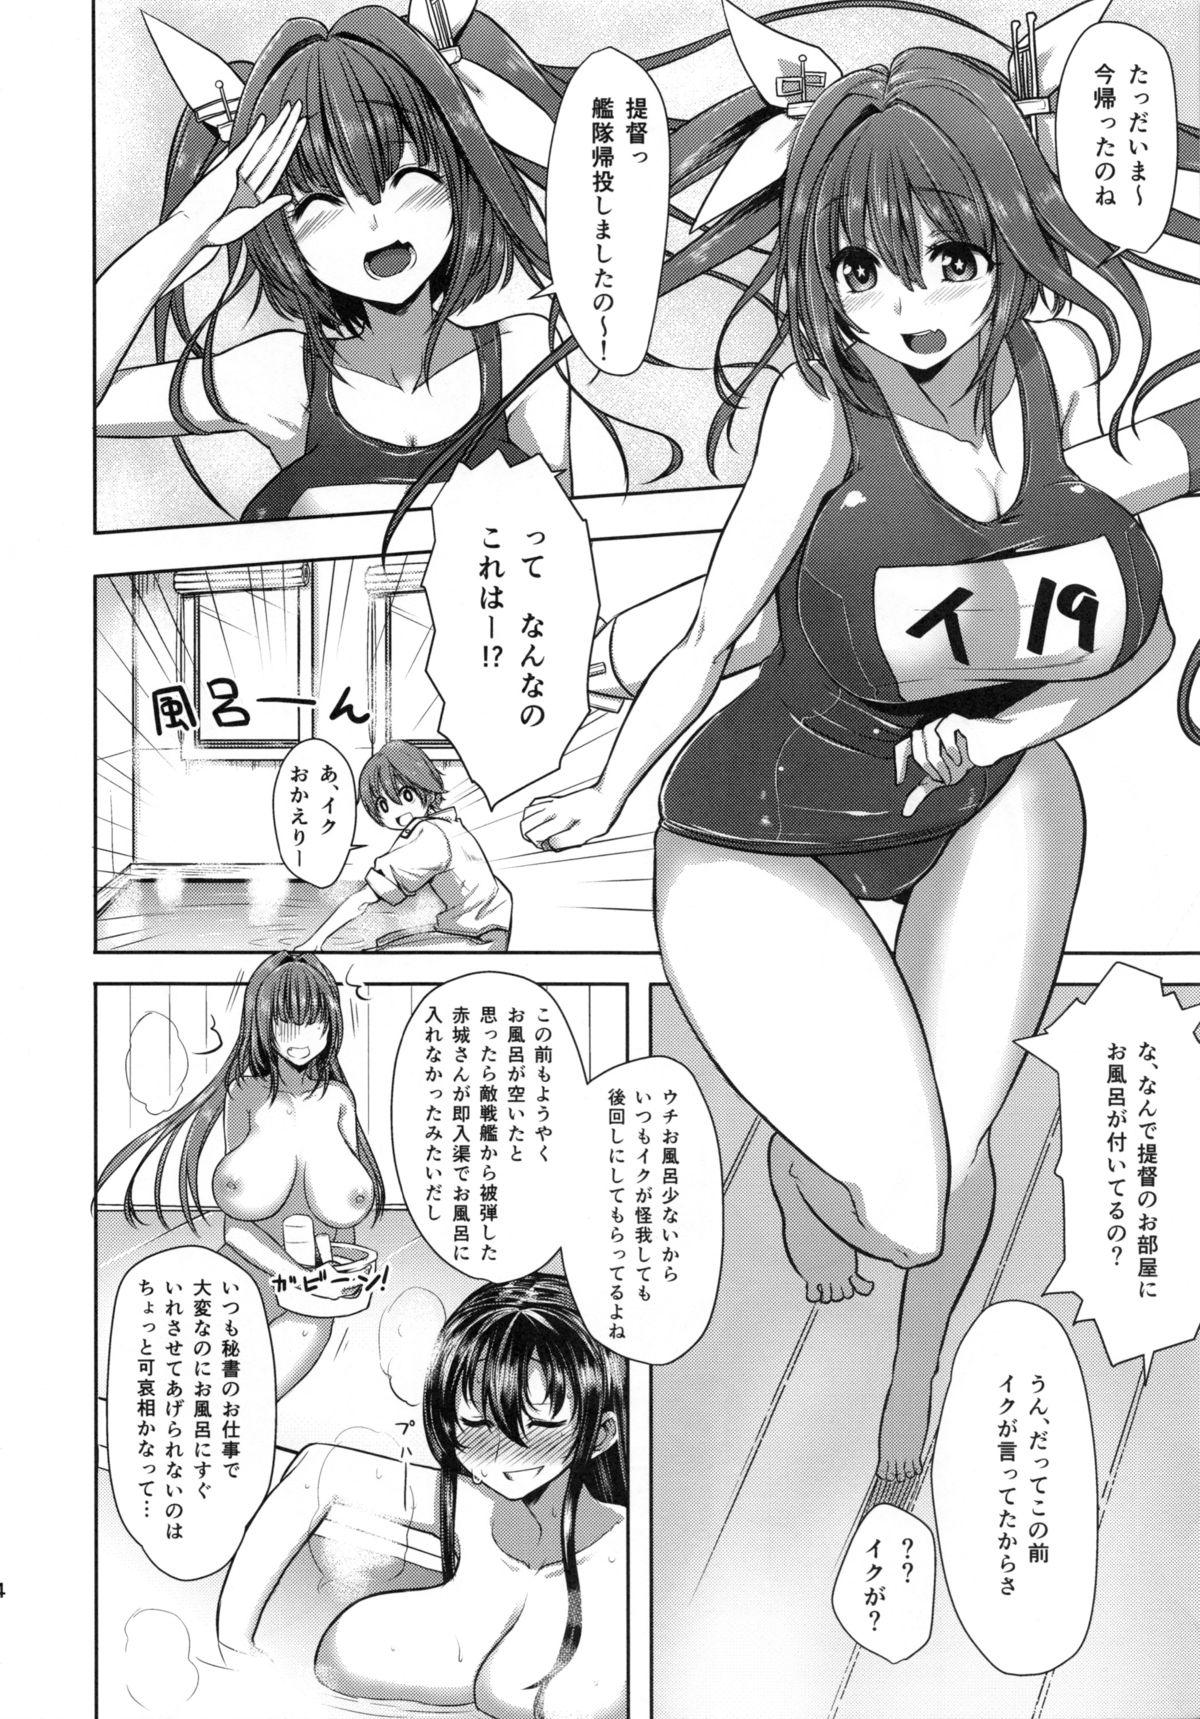 Rough Sex Porn I-19 to Icchau?? - Kantai collection Free Blowjobs - Page 3